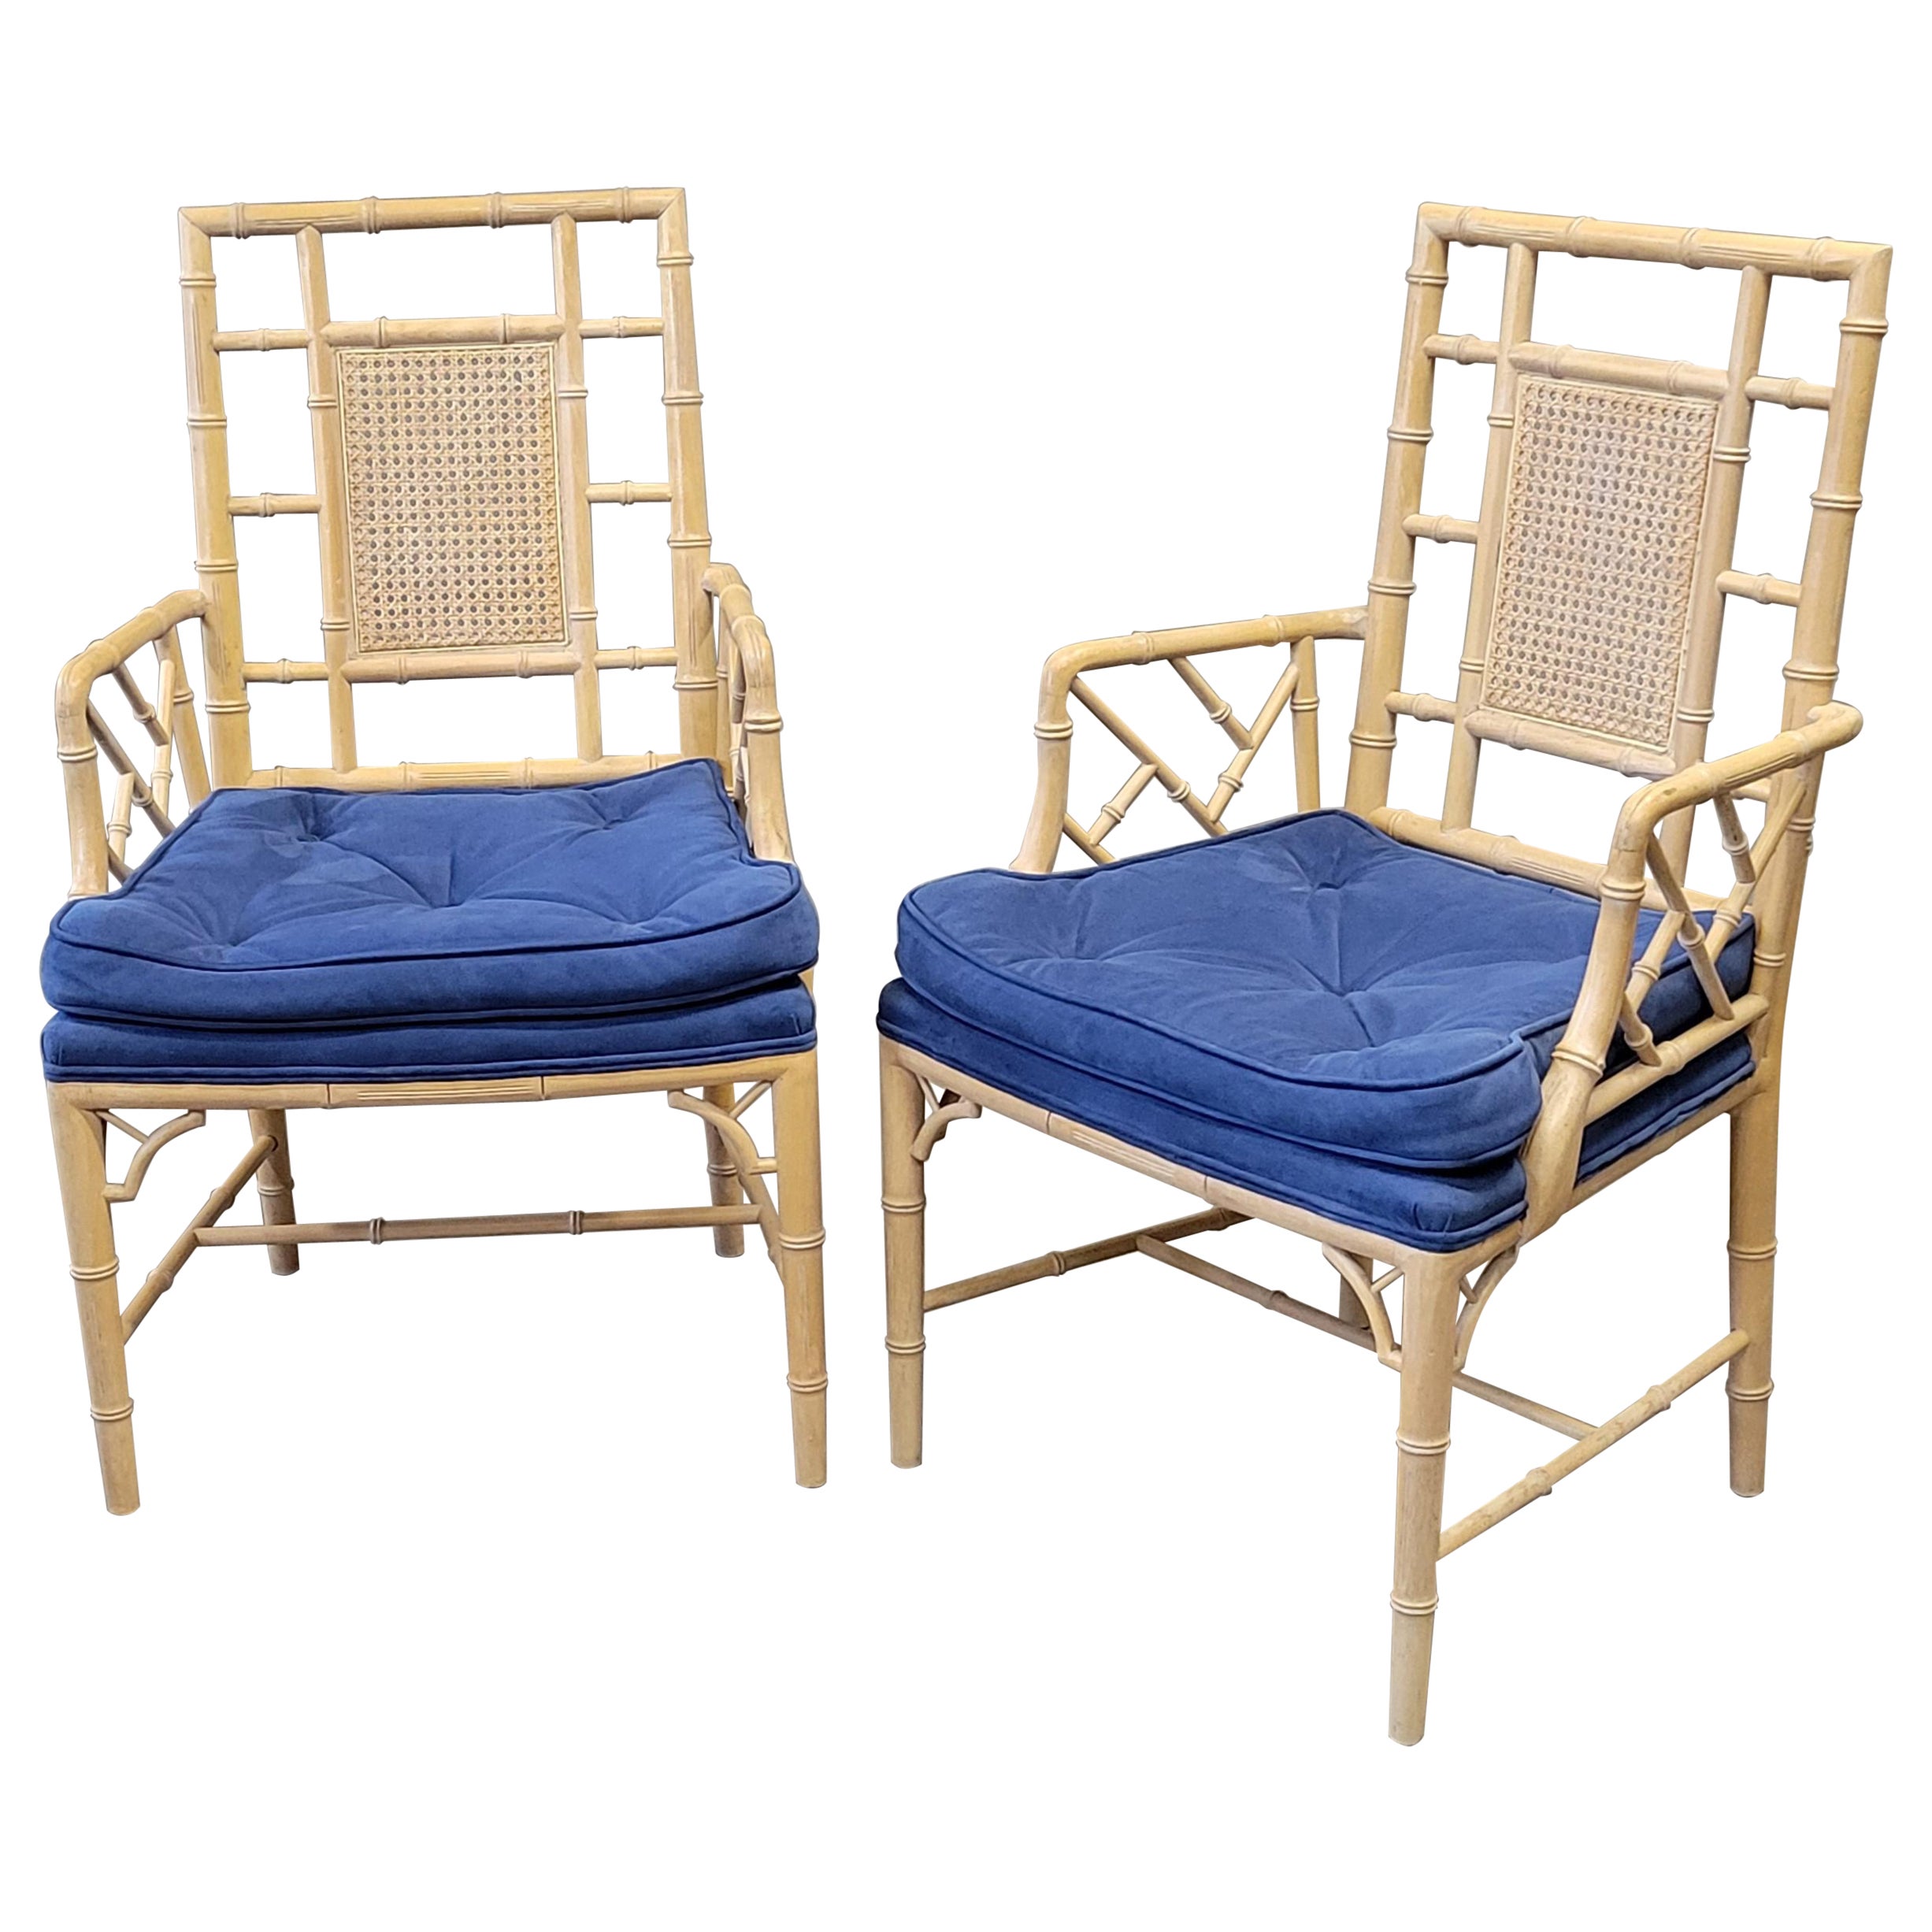 Vintage Faux Bamboo Chairs With Blue Cushions - a Pair For Sale